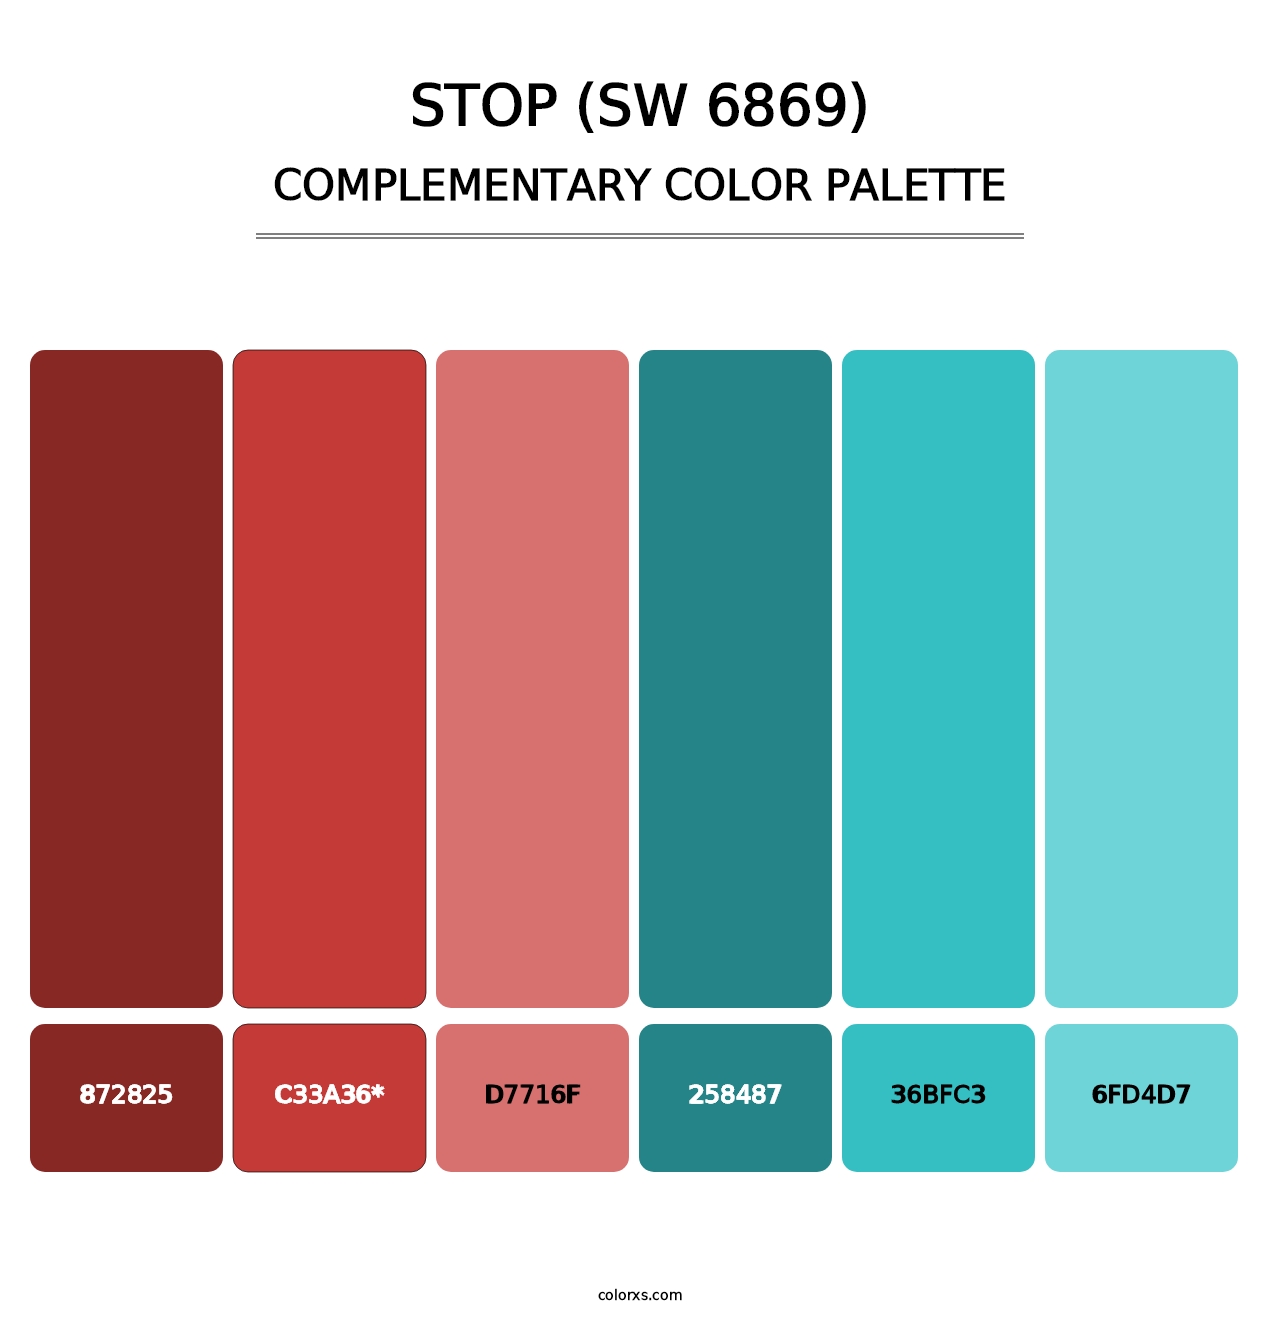 Stop (SW 6869) - Complementary Color Palette